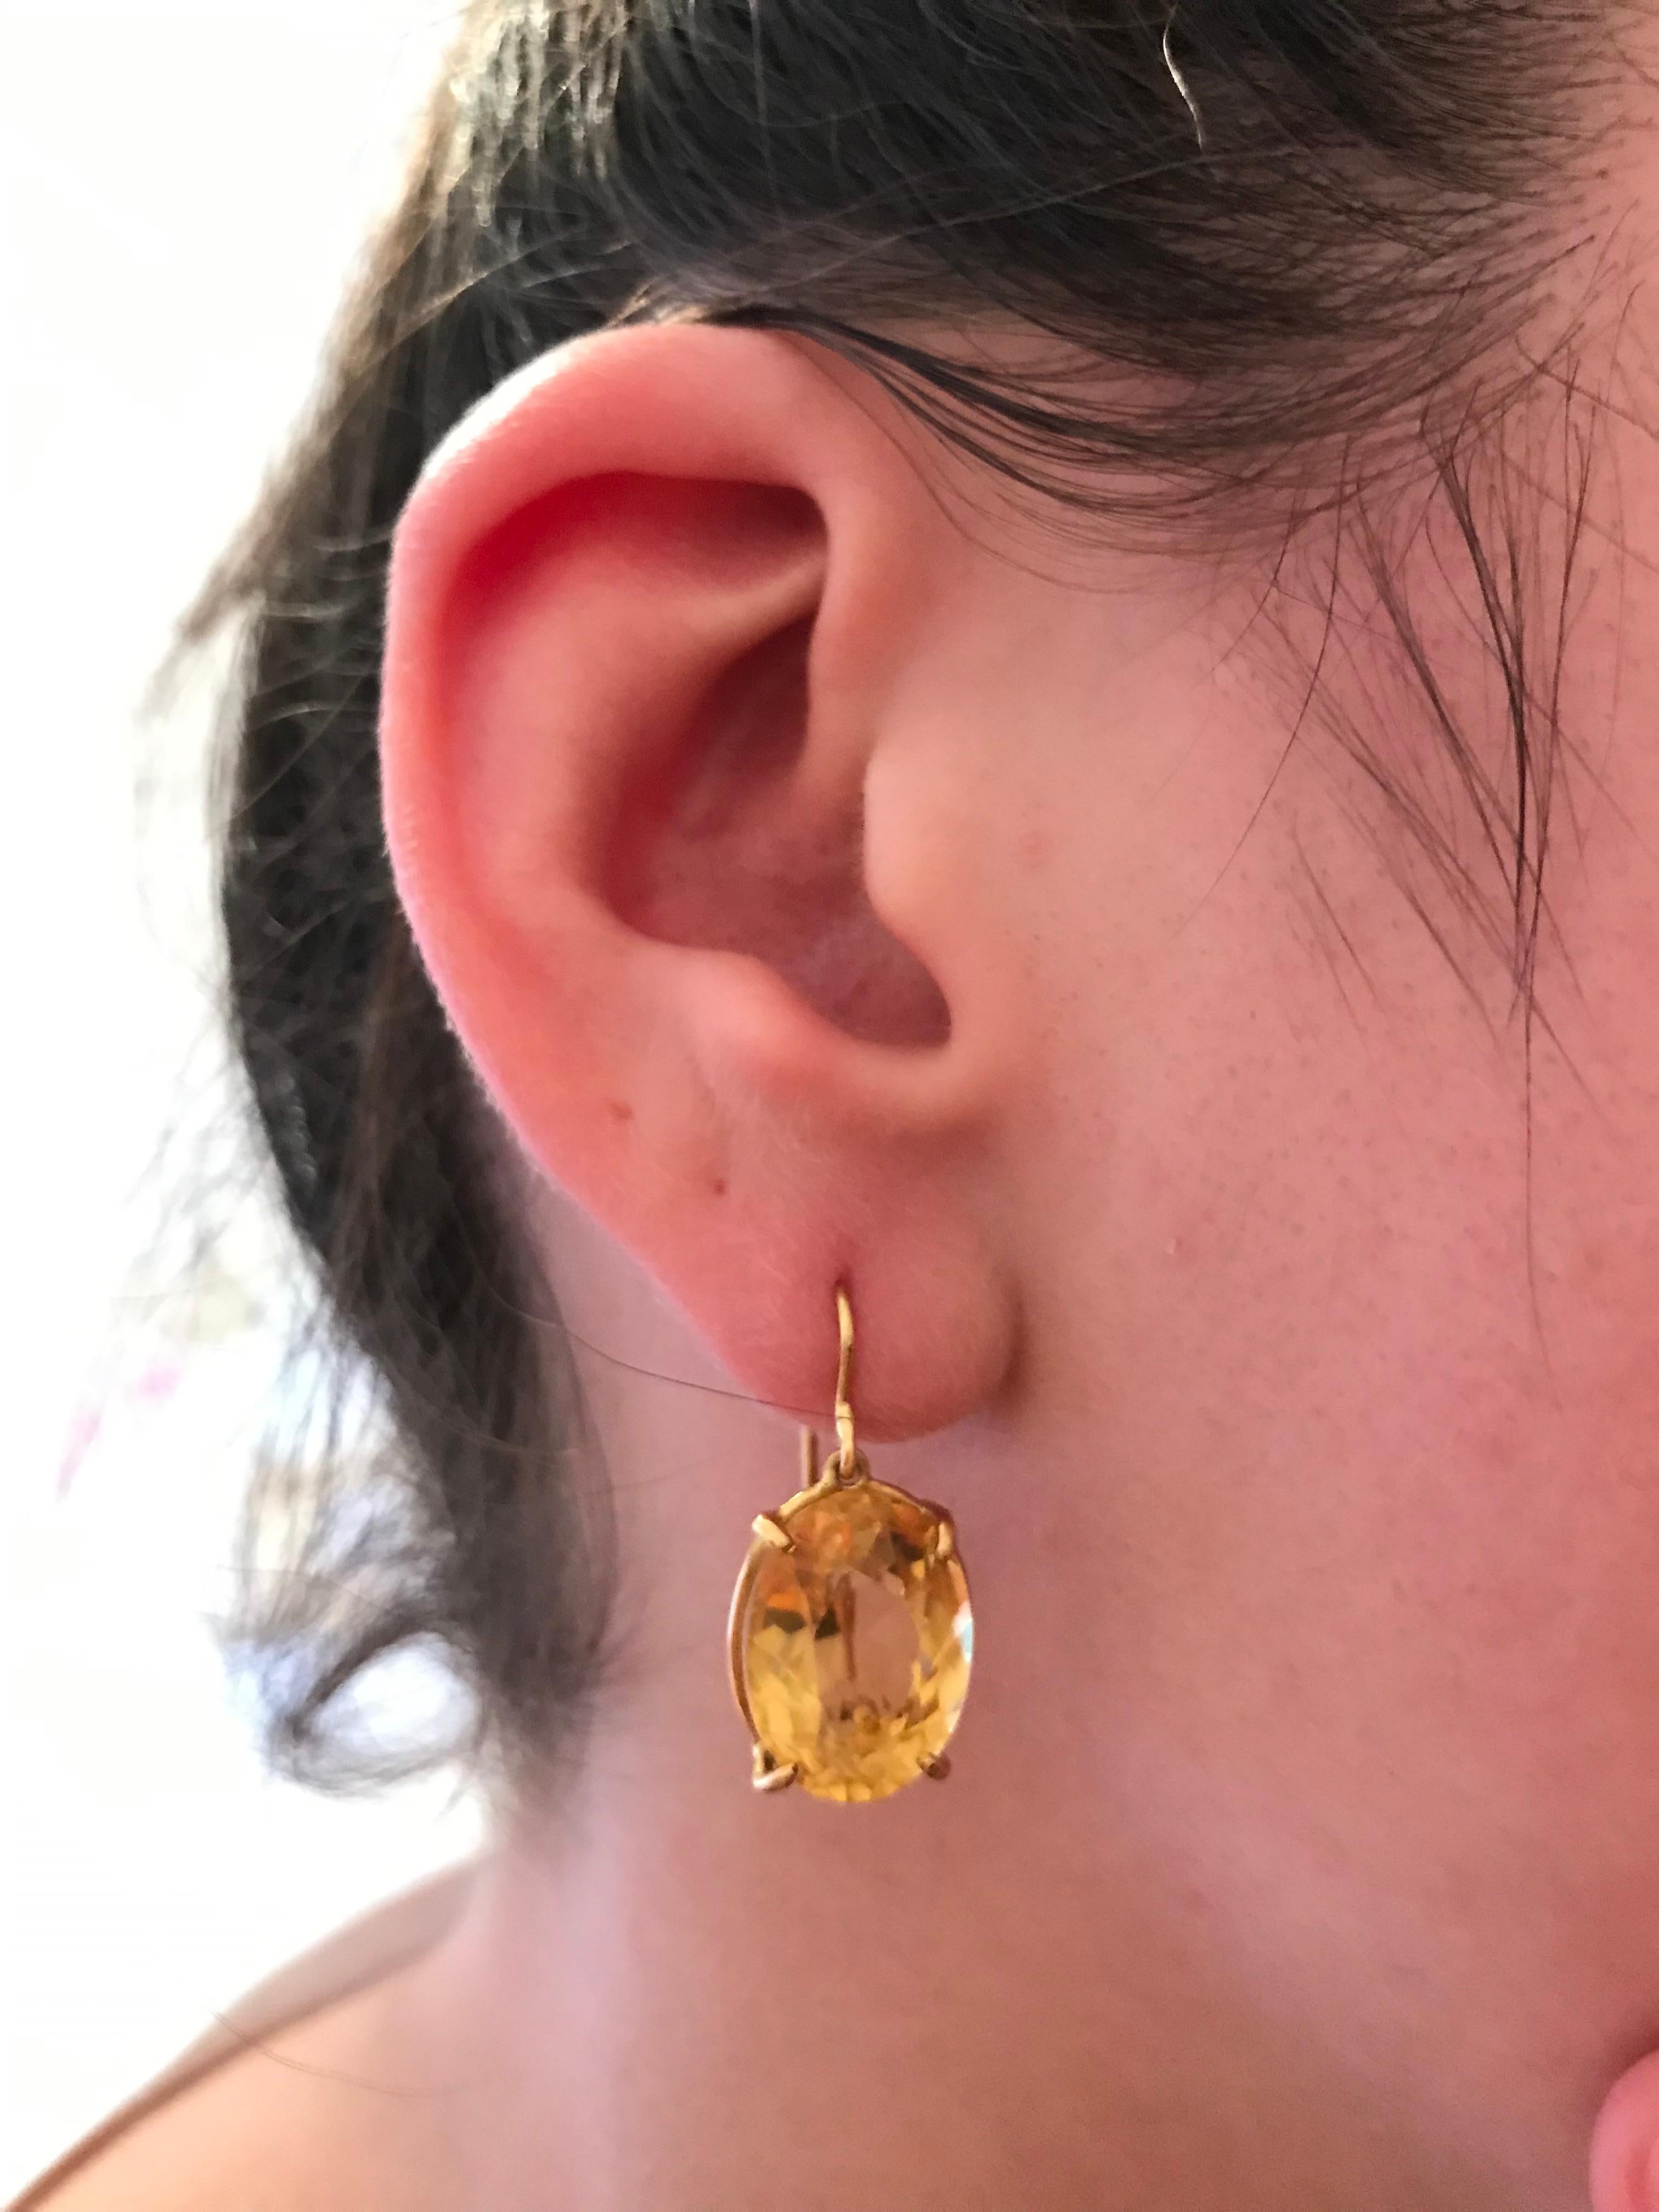 The Gabriella Hanging Stone Earring.  This Dangling French Wire Earring is finished with an Oval Faceted Citrine and Four delicate Prongs.

The Oval Stone measures approximately 5/8